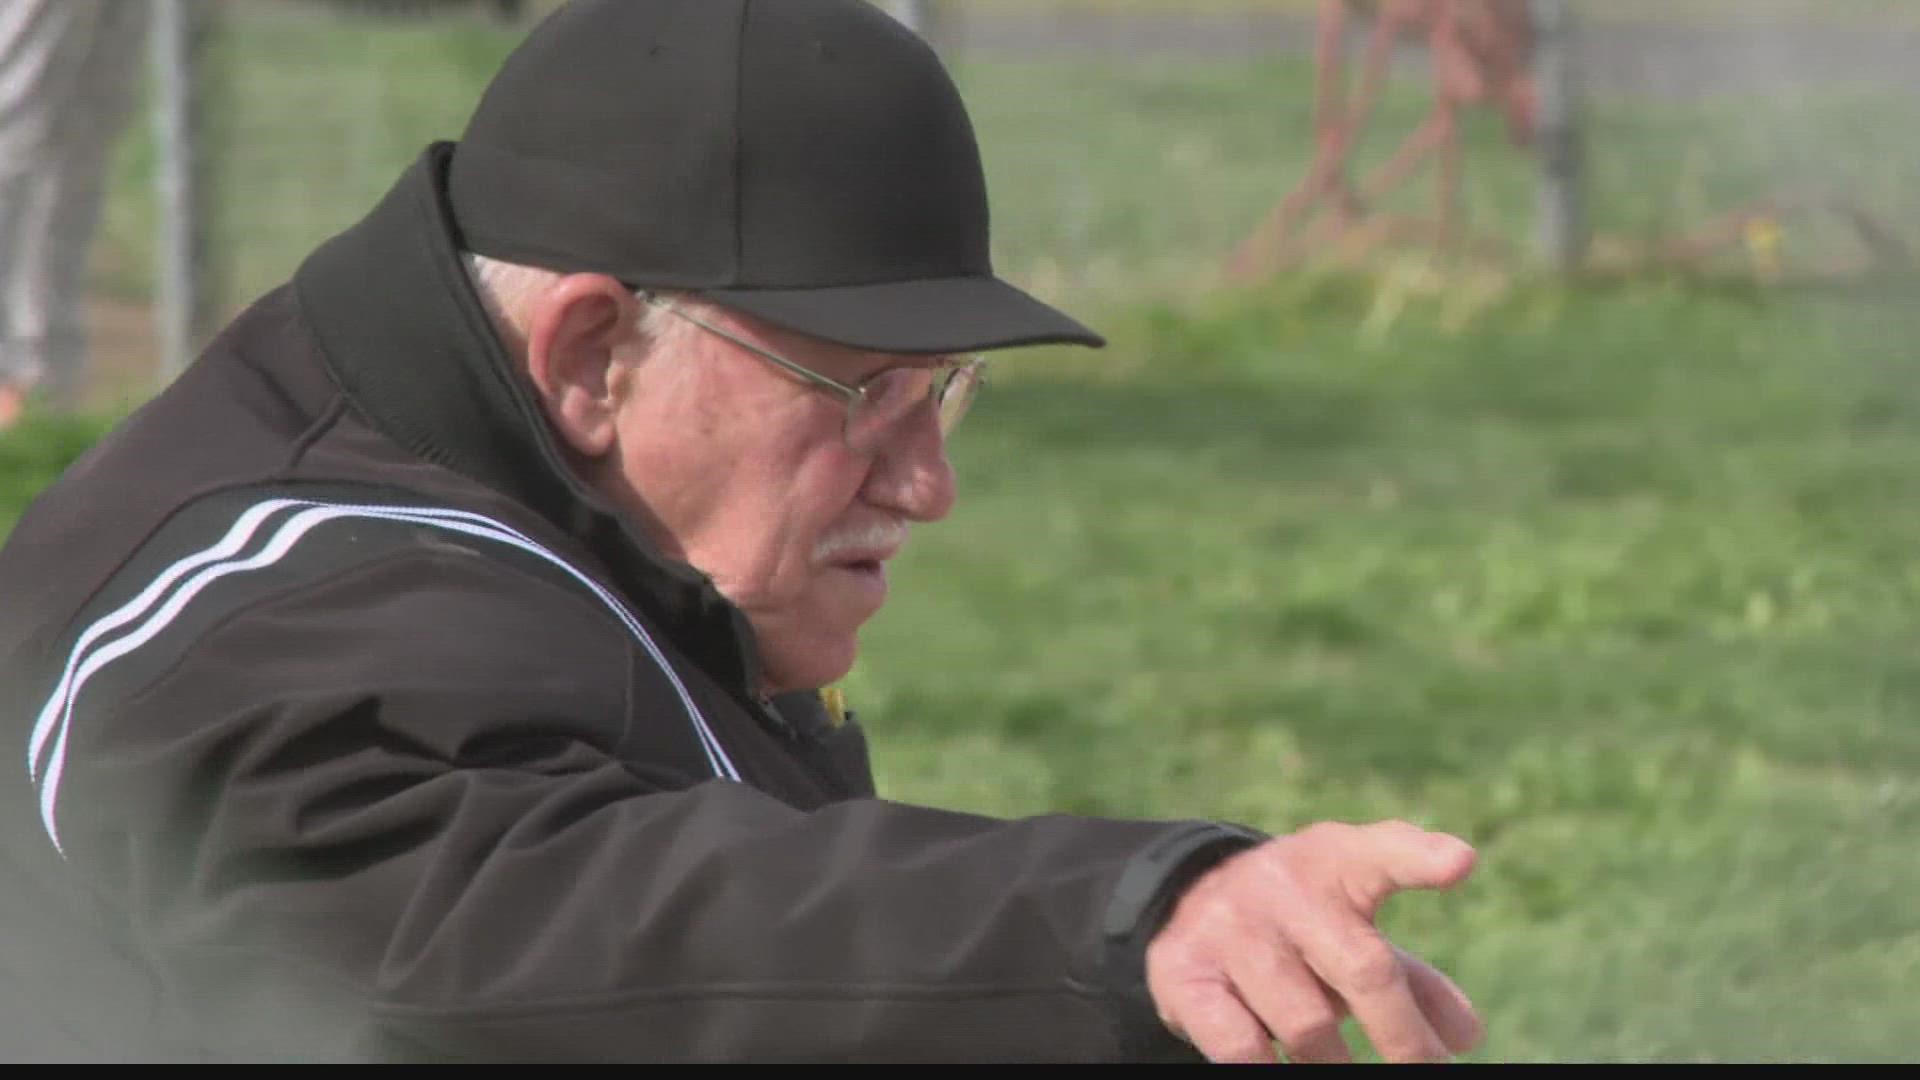 For 50 years, this umpire has been overseeing the fields of St. Louis.